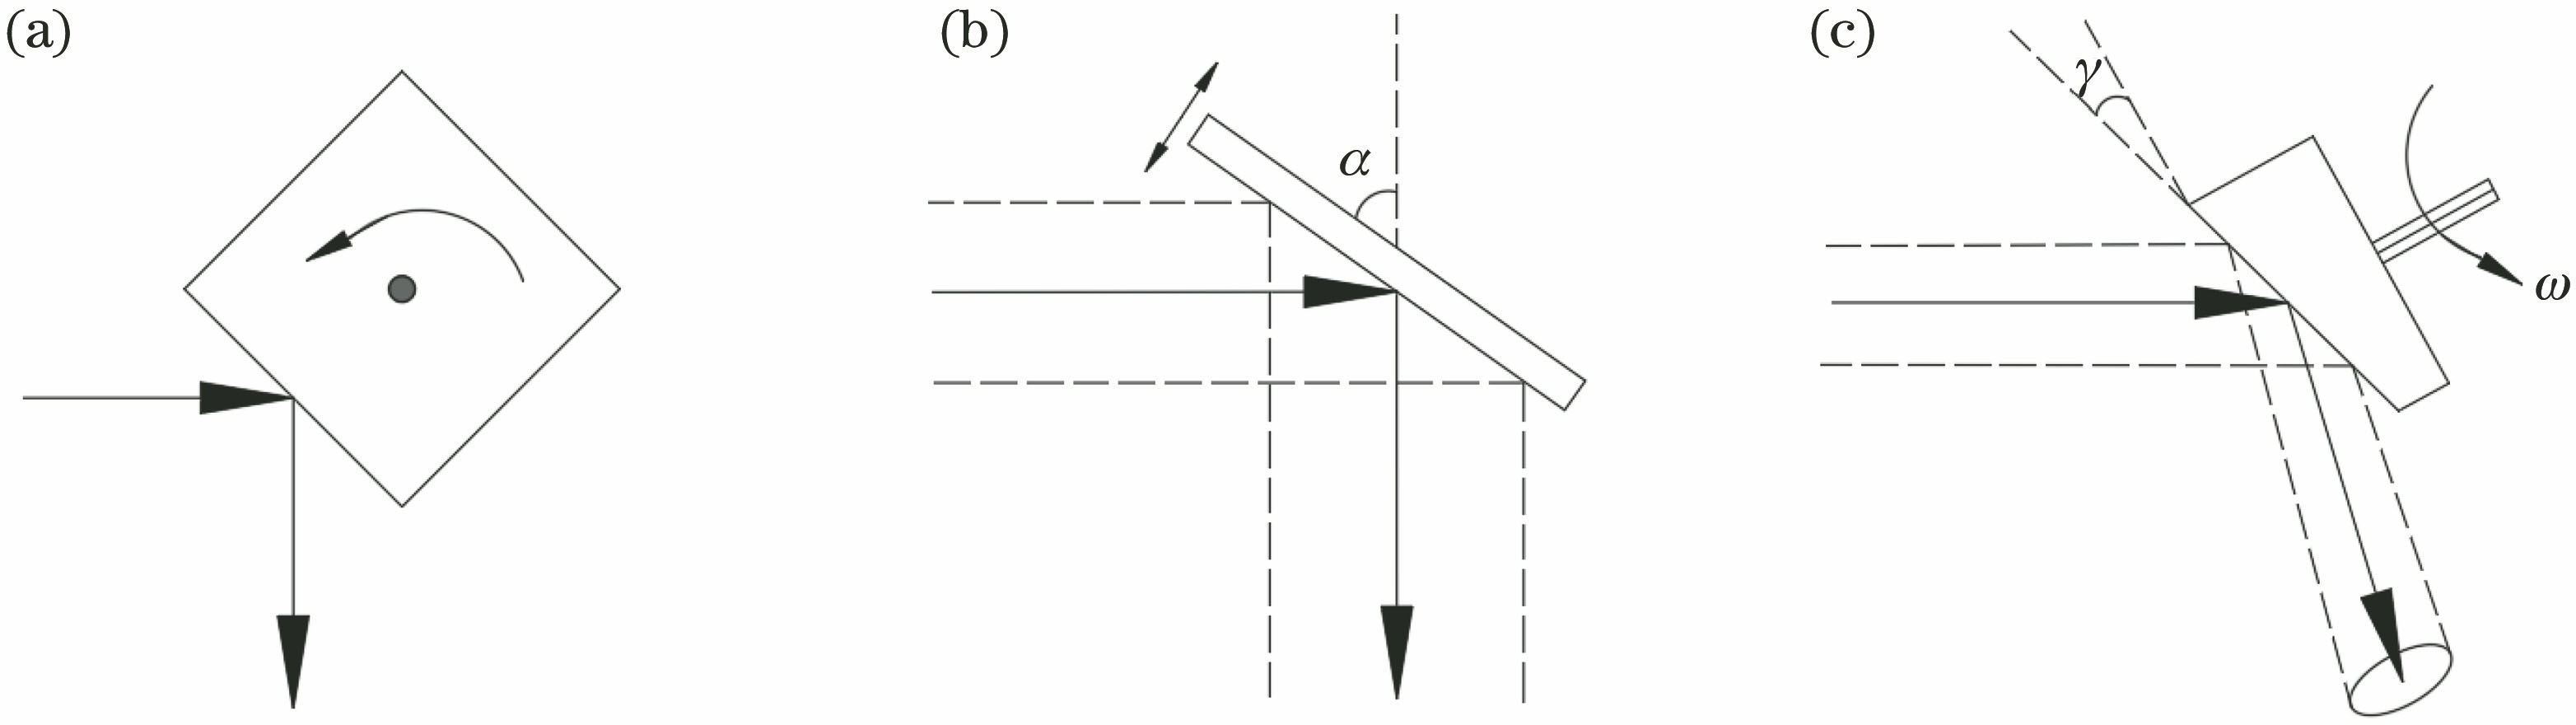 Scanning mode of the LiDAR system. (a) Polyhedral rotating mirror scanning; (b) vibrator mirror scanning; (c) conical scanning